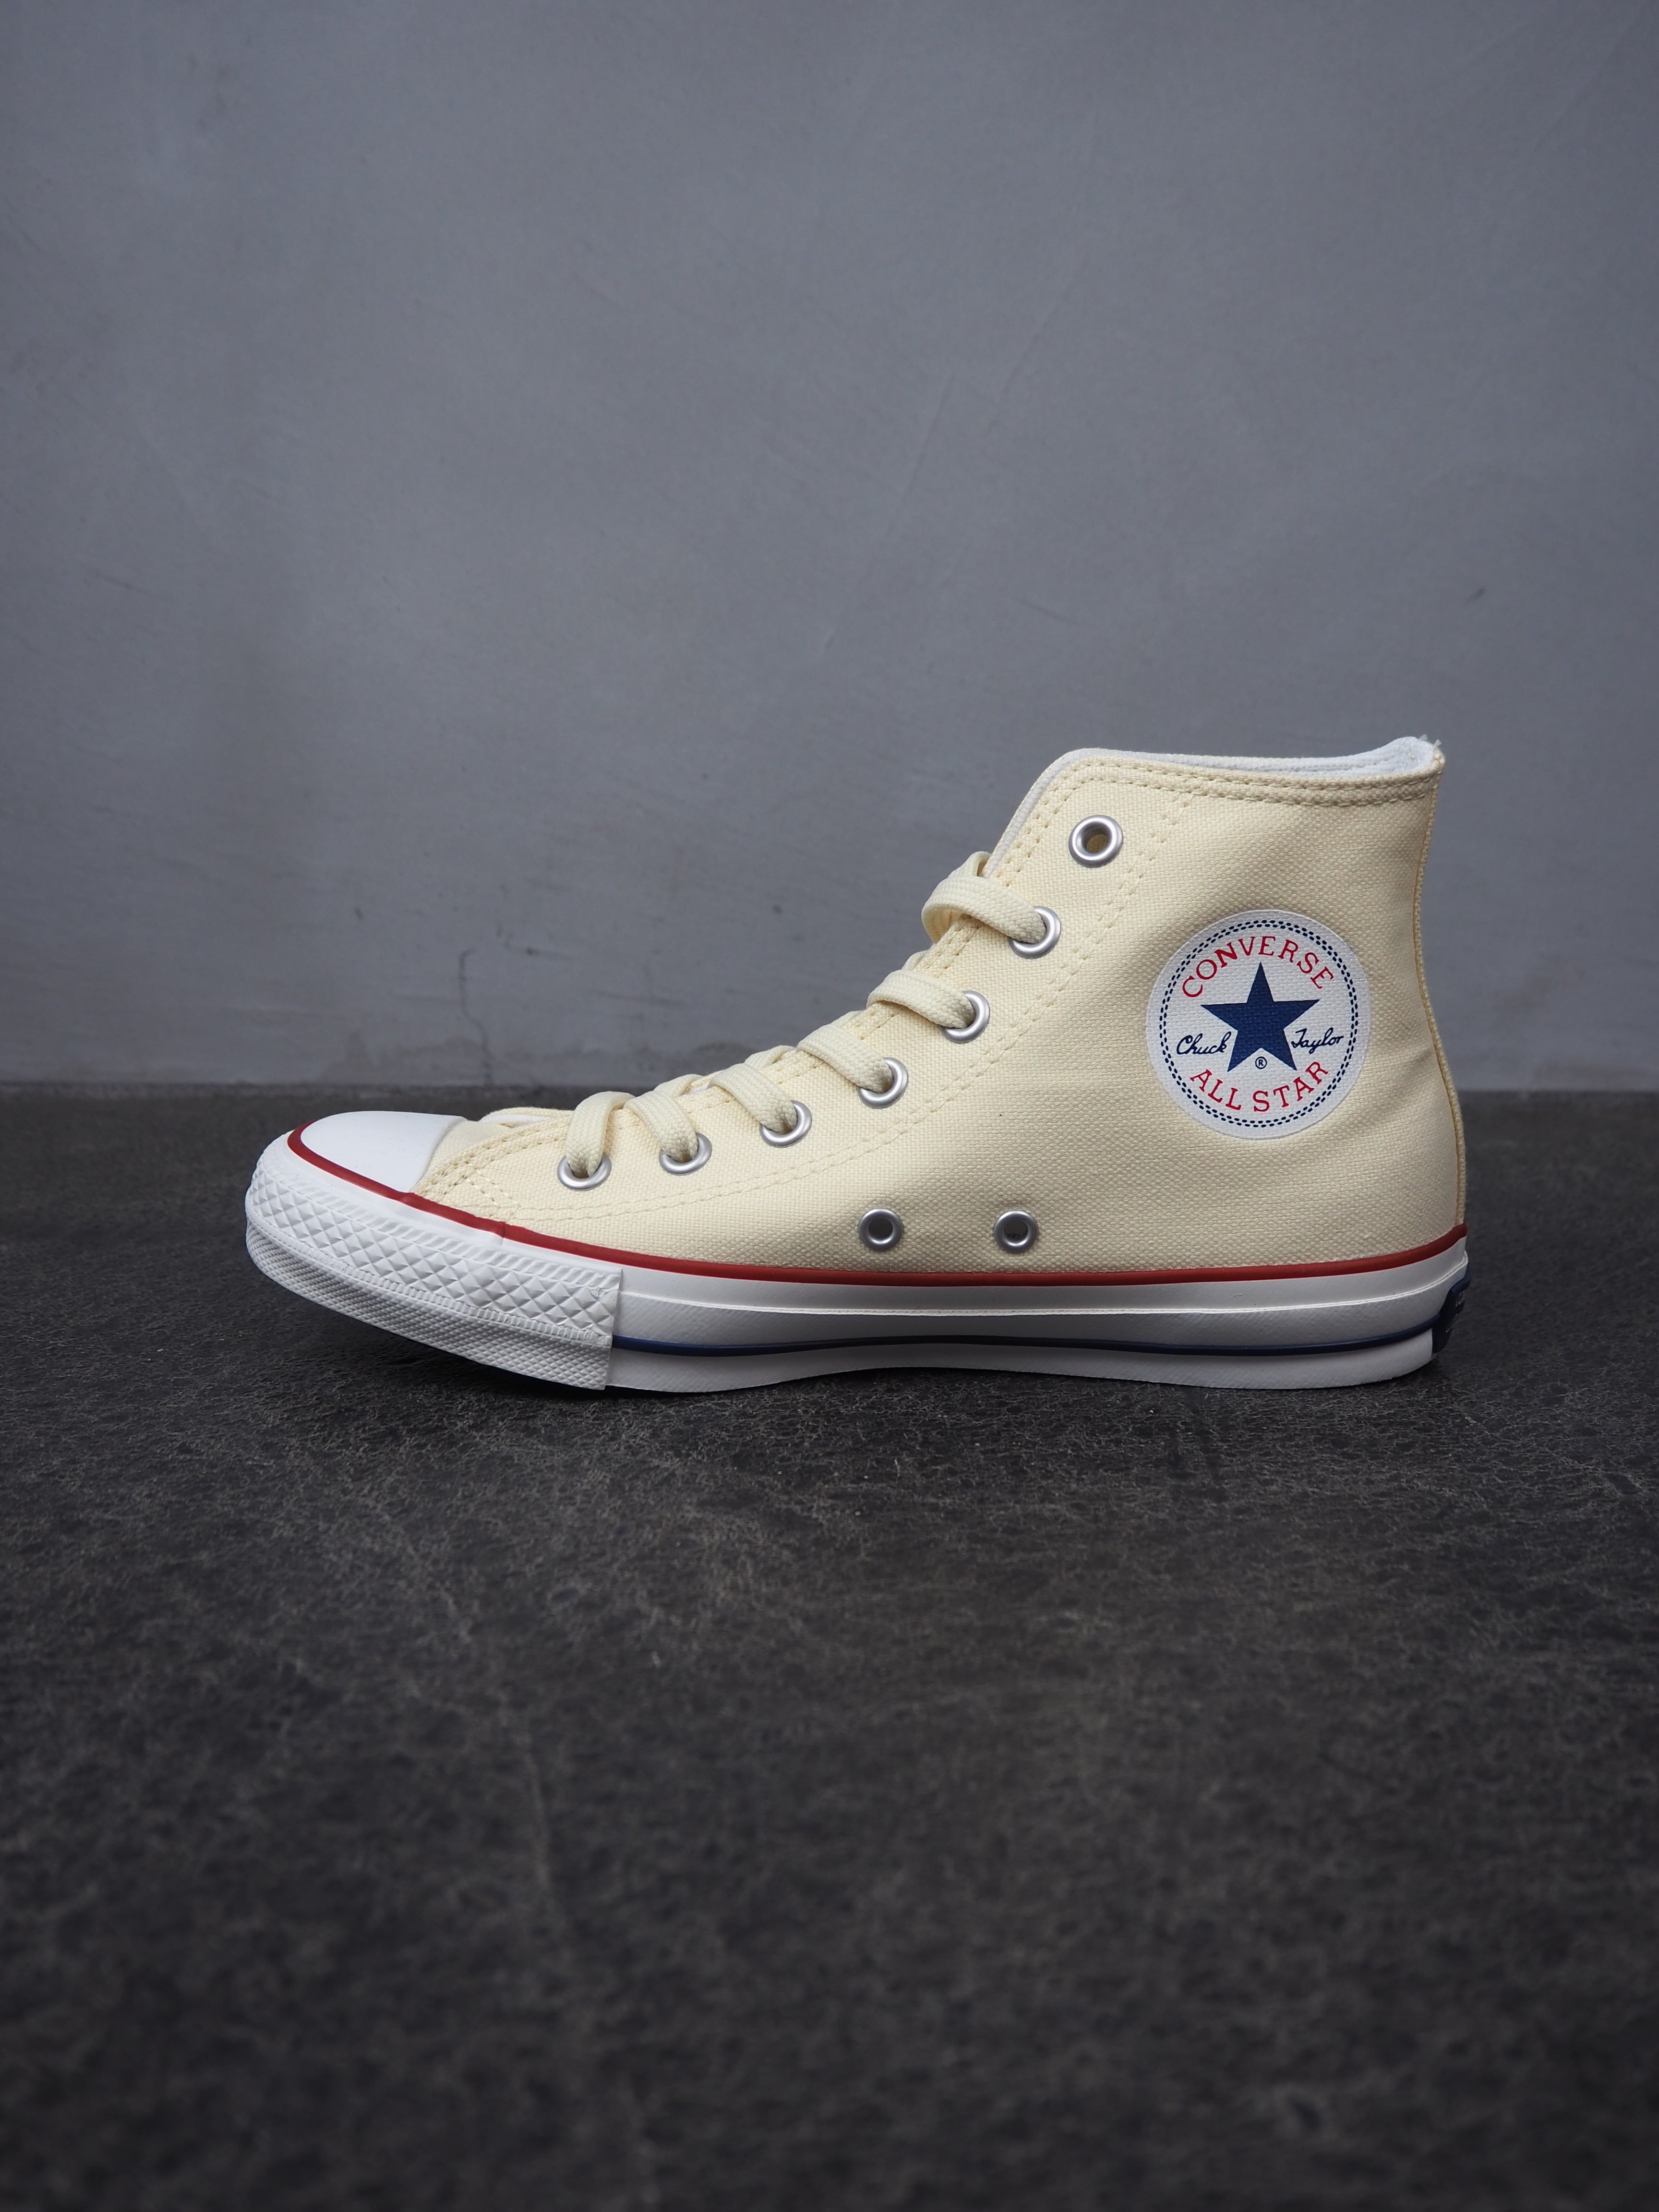 【CONVERSE】ALL STAR 100 COLORS